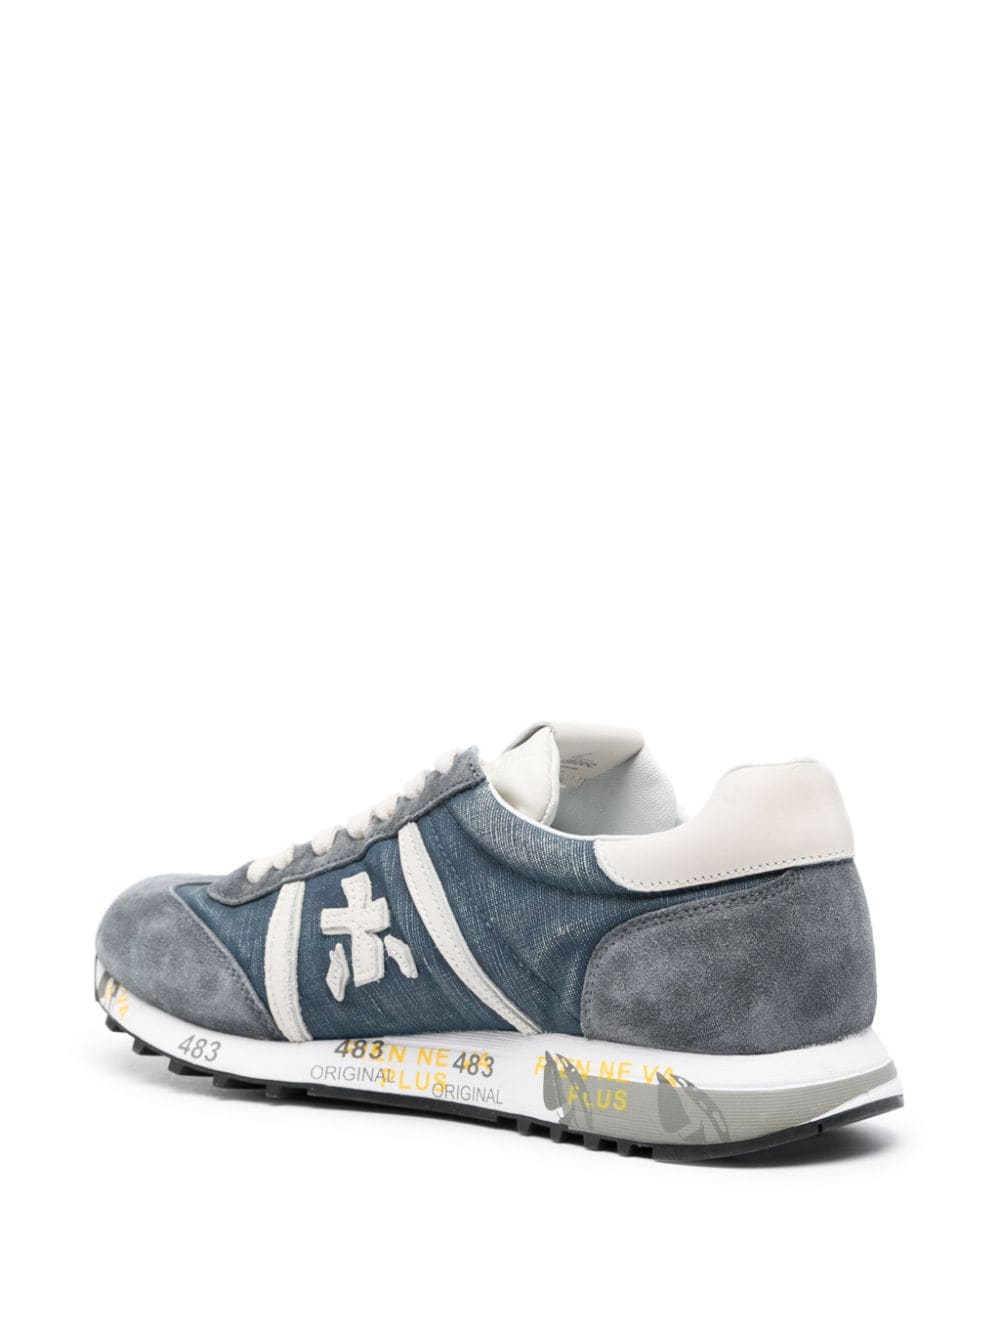 'Lucy 6620' sneakers